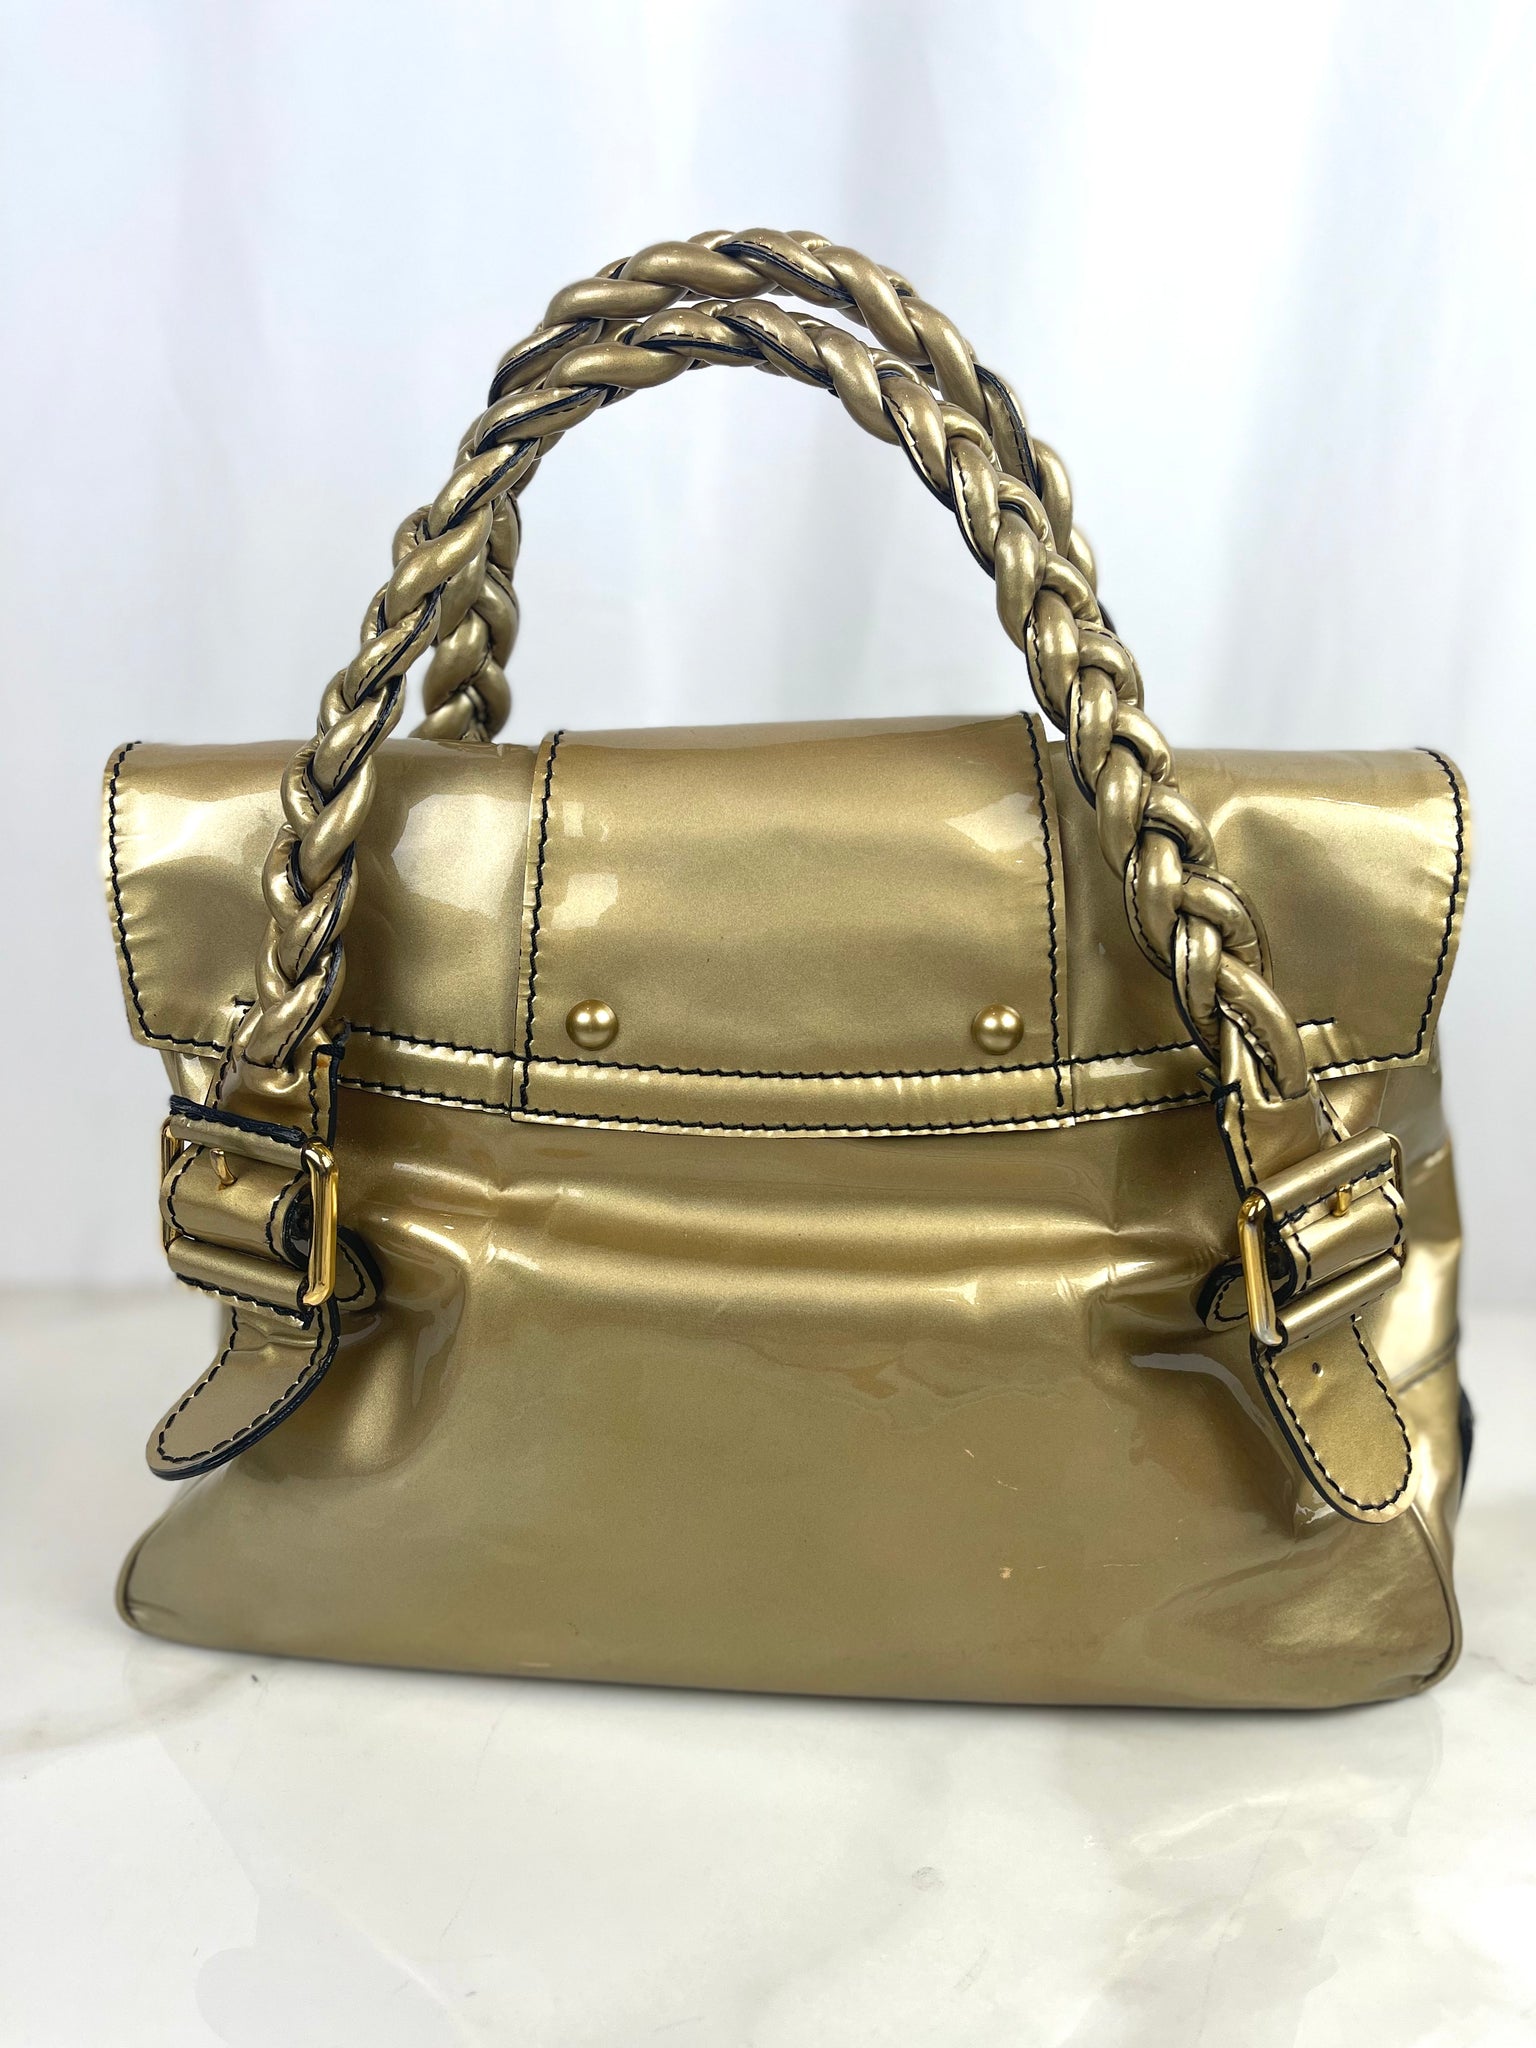 Valentino Brown Leather Vintage Braided Handle Tote Bag | DBLTKE Luxury Consignment Boutique